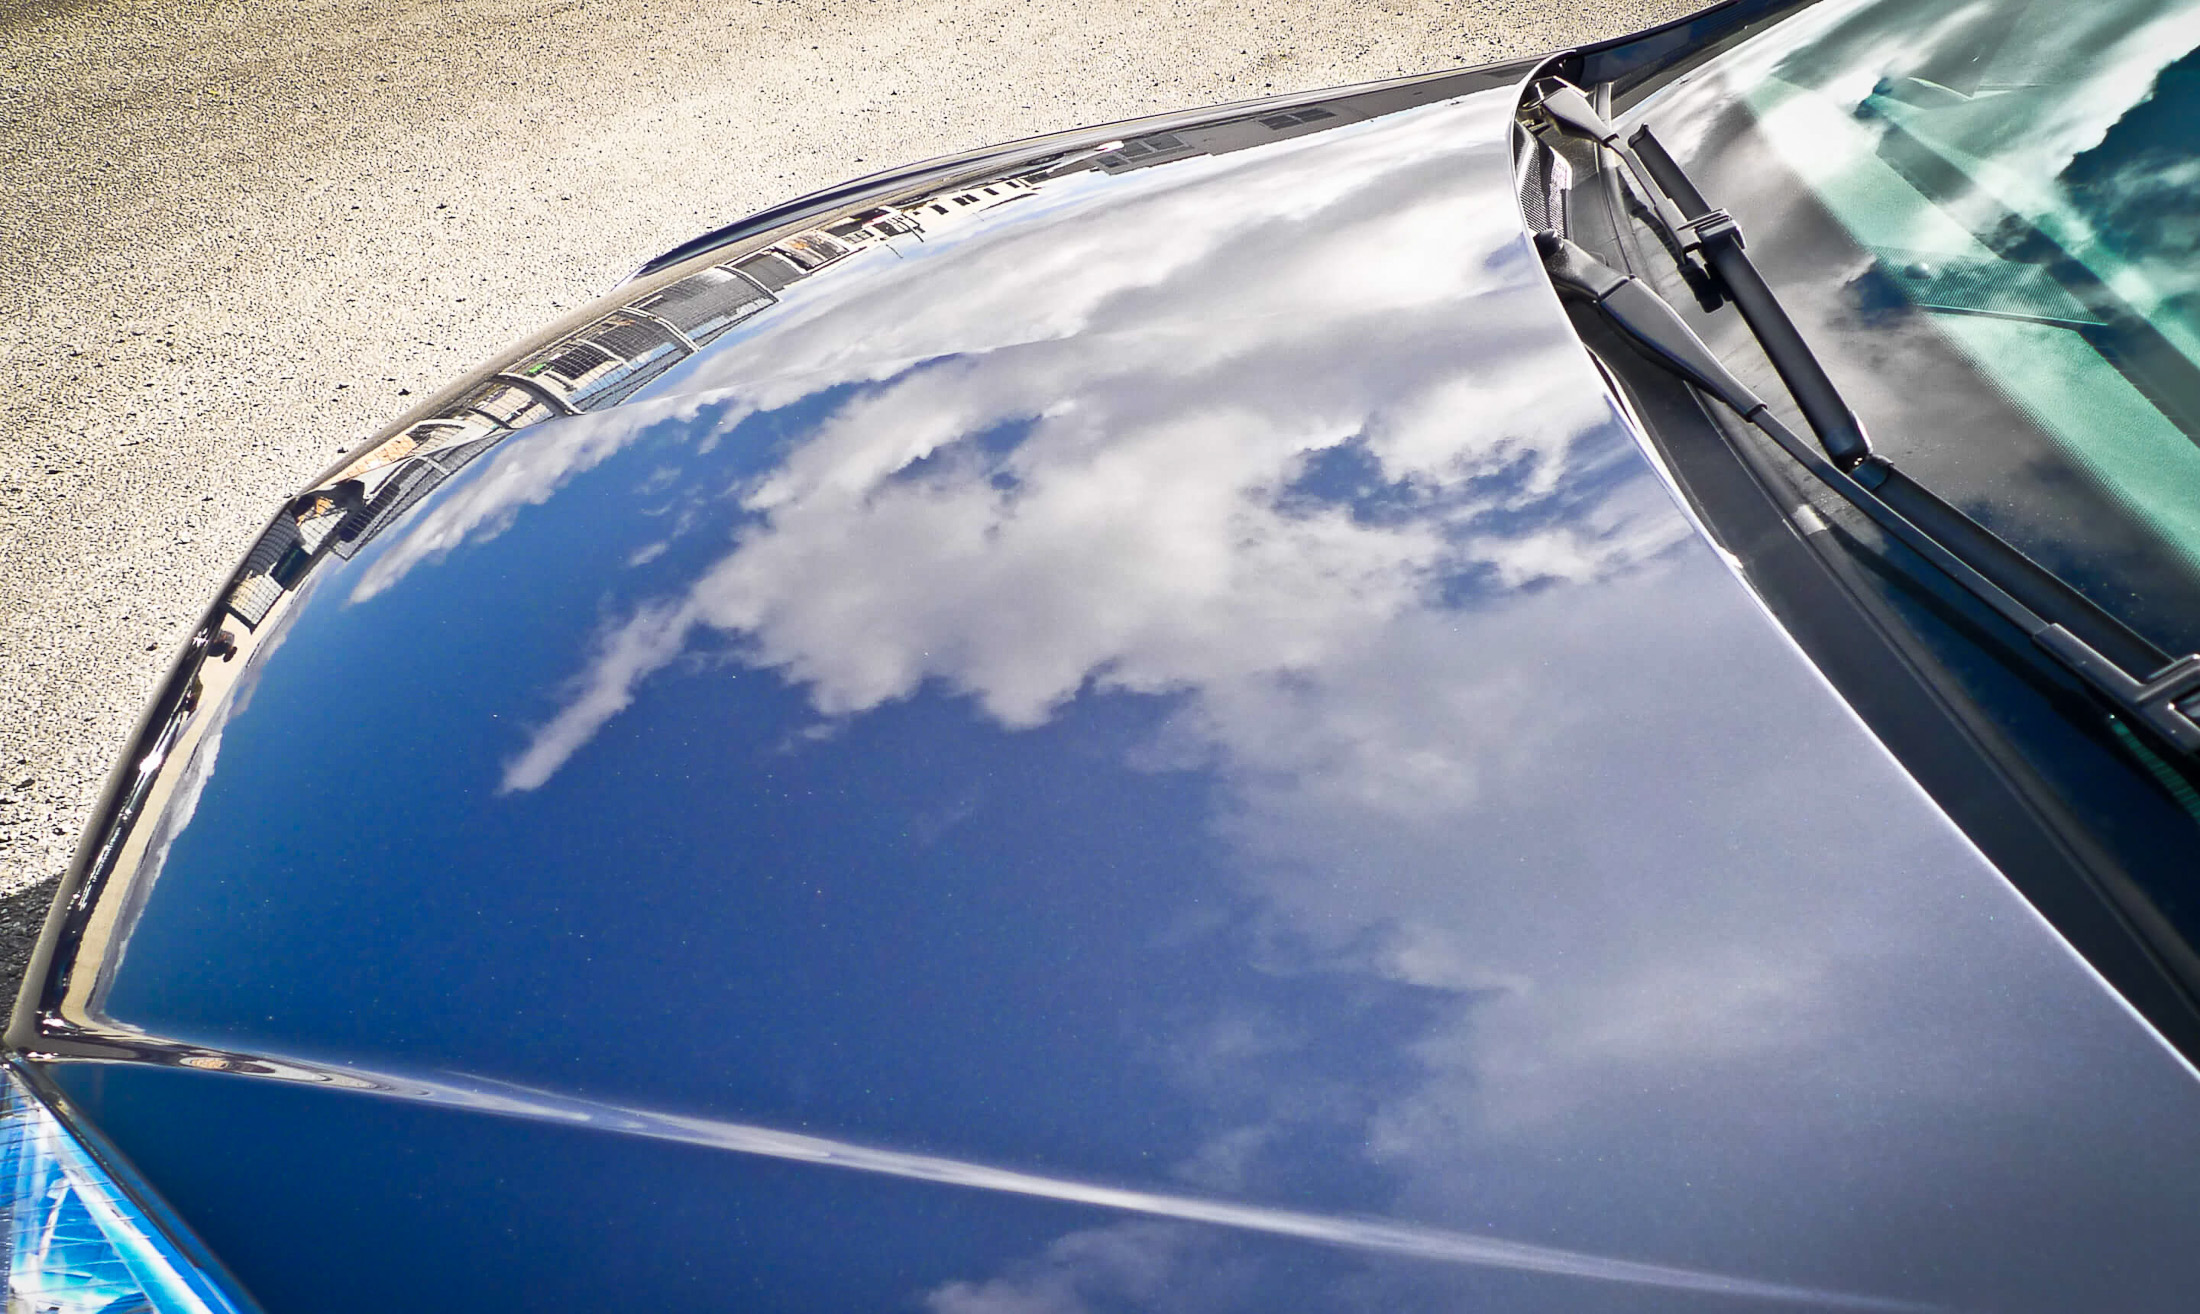 Reflections of clouds in bonnet after detailing